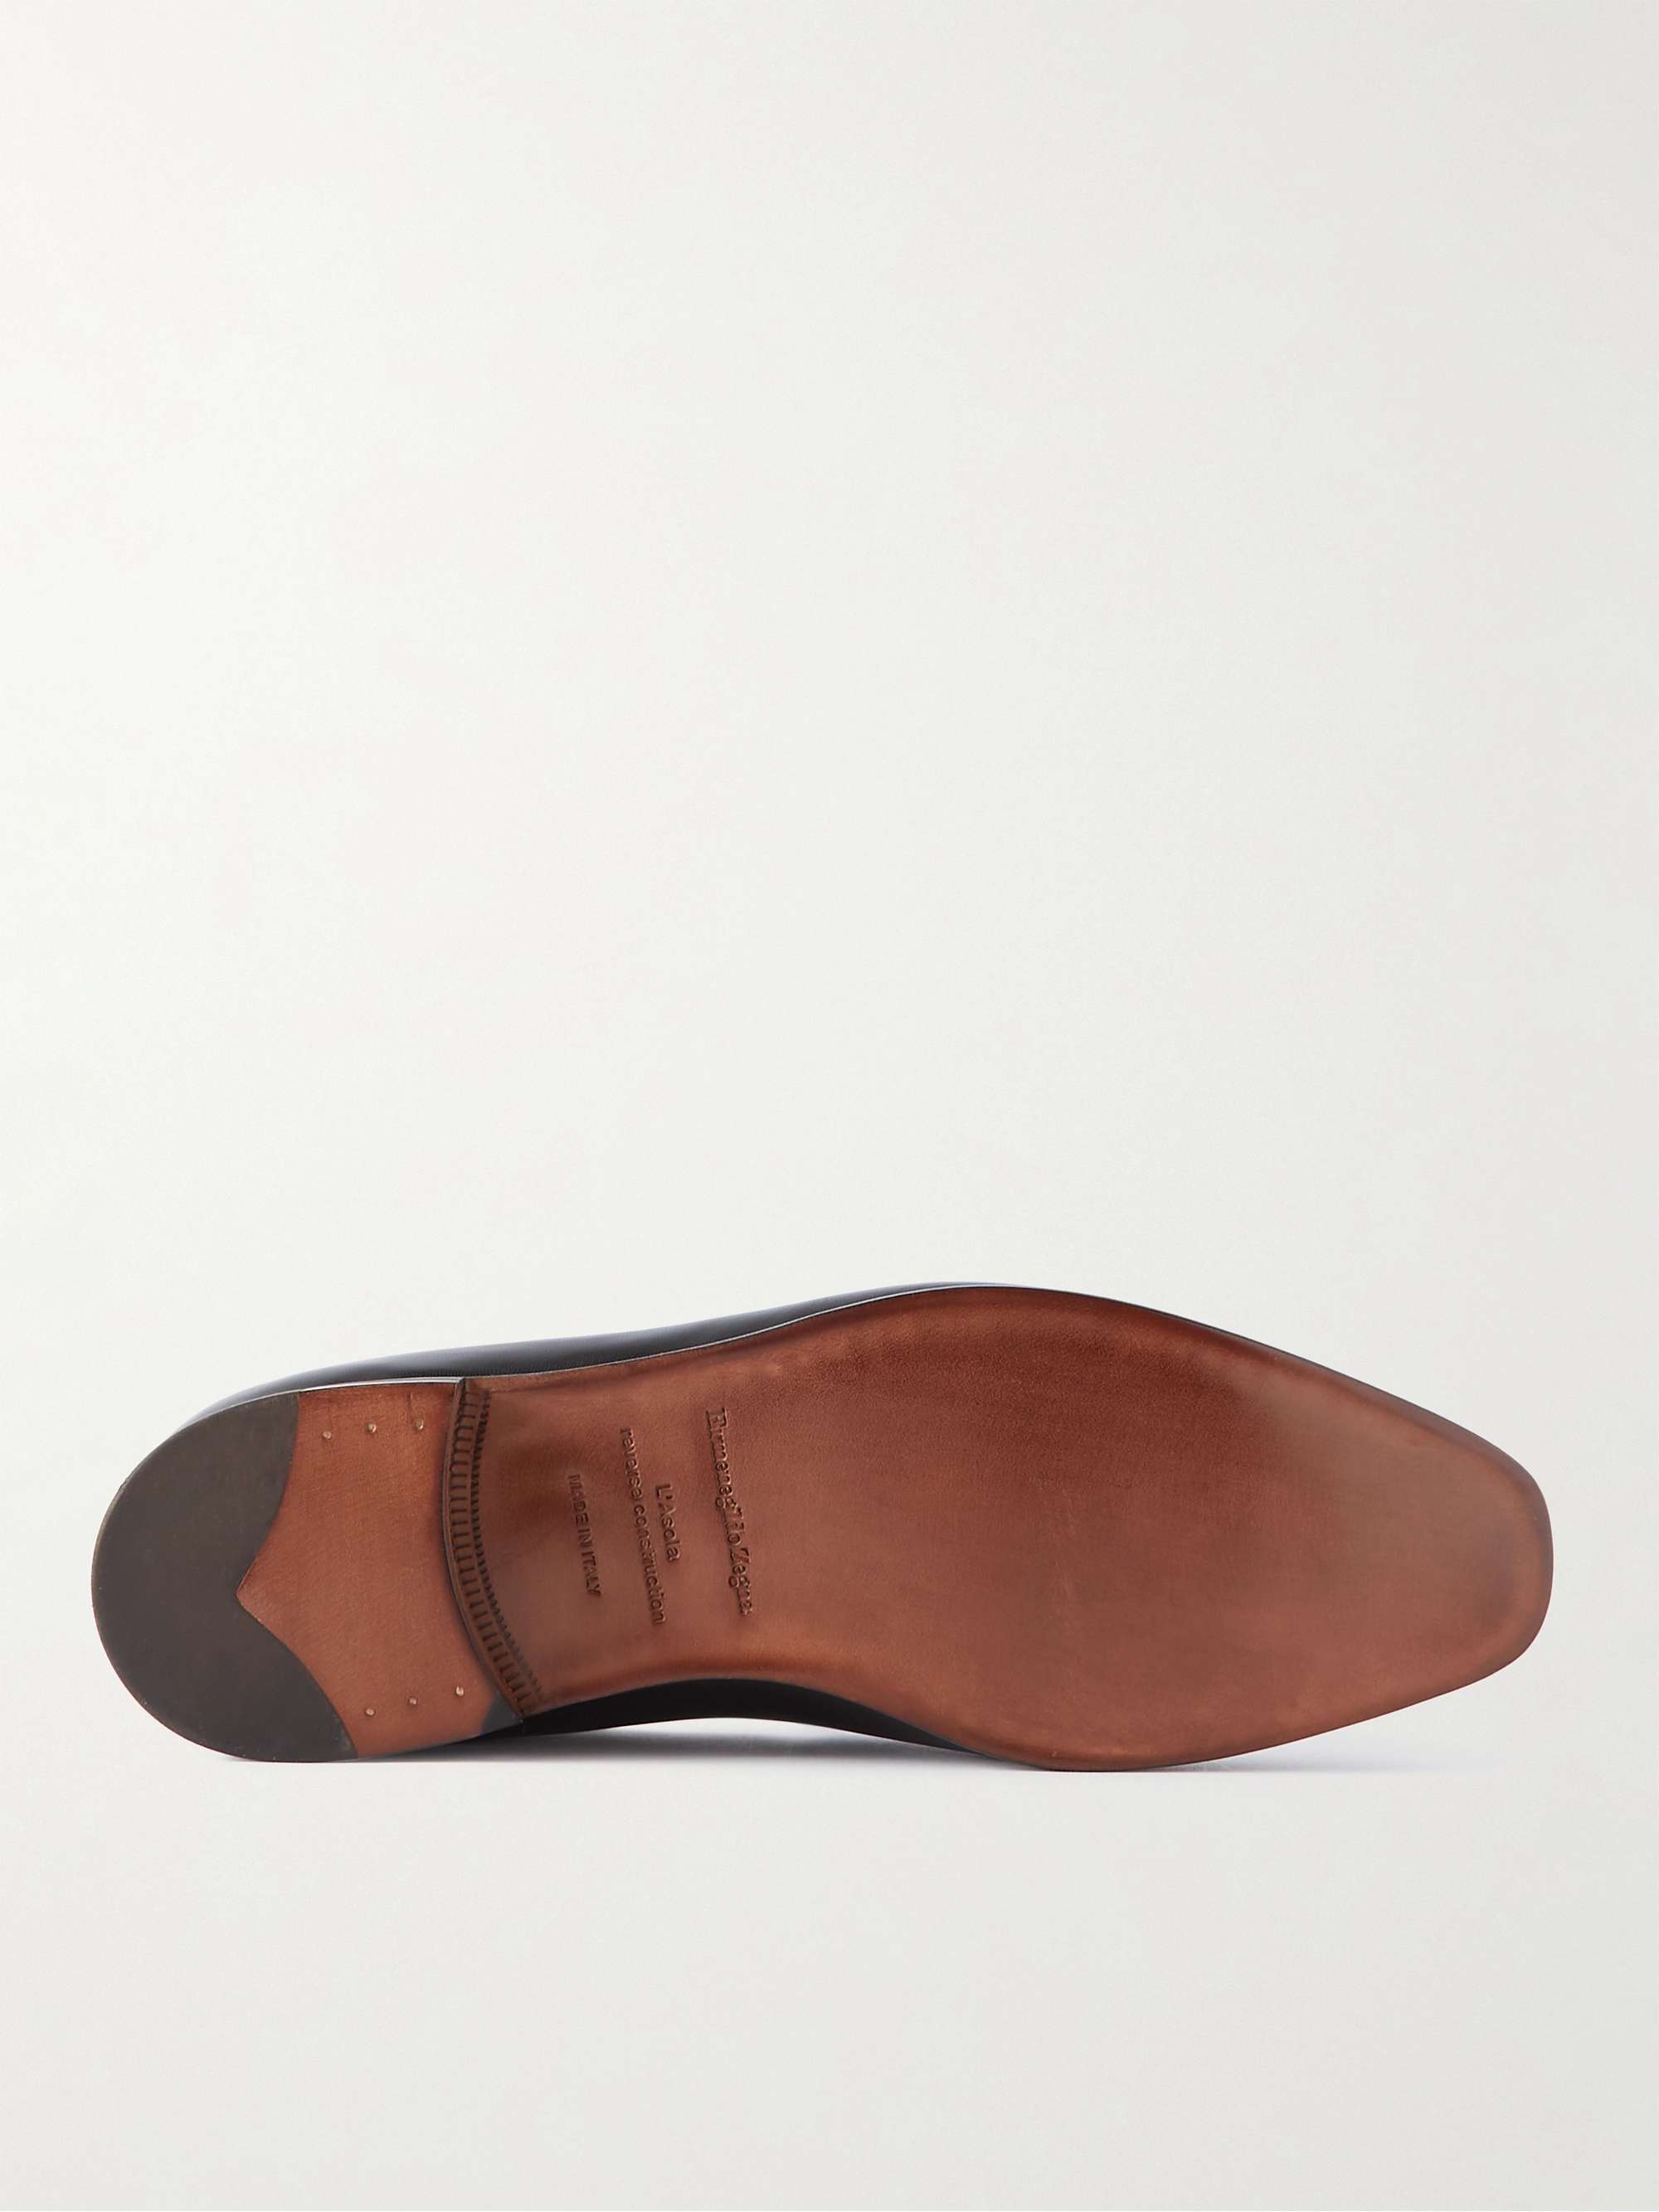 ZEGNA L'Asola Leather Penny Loafers